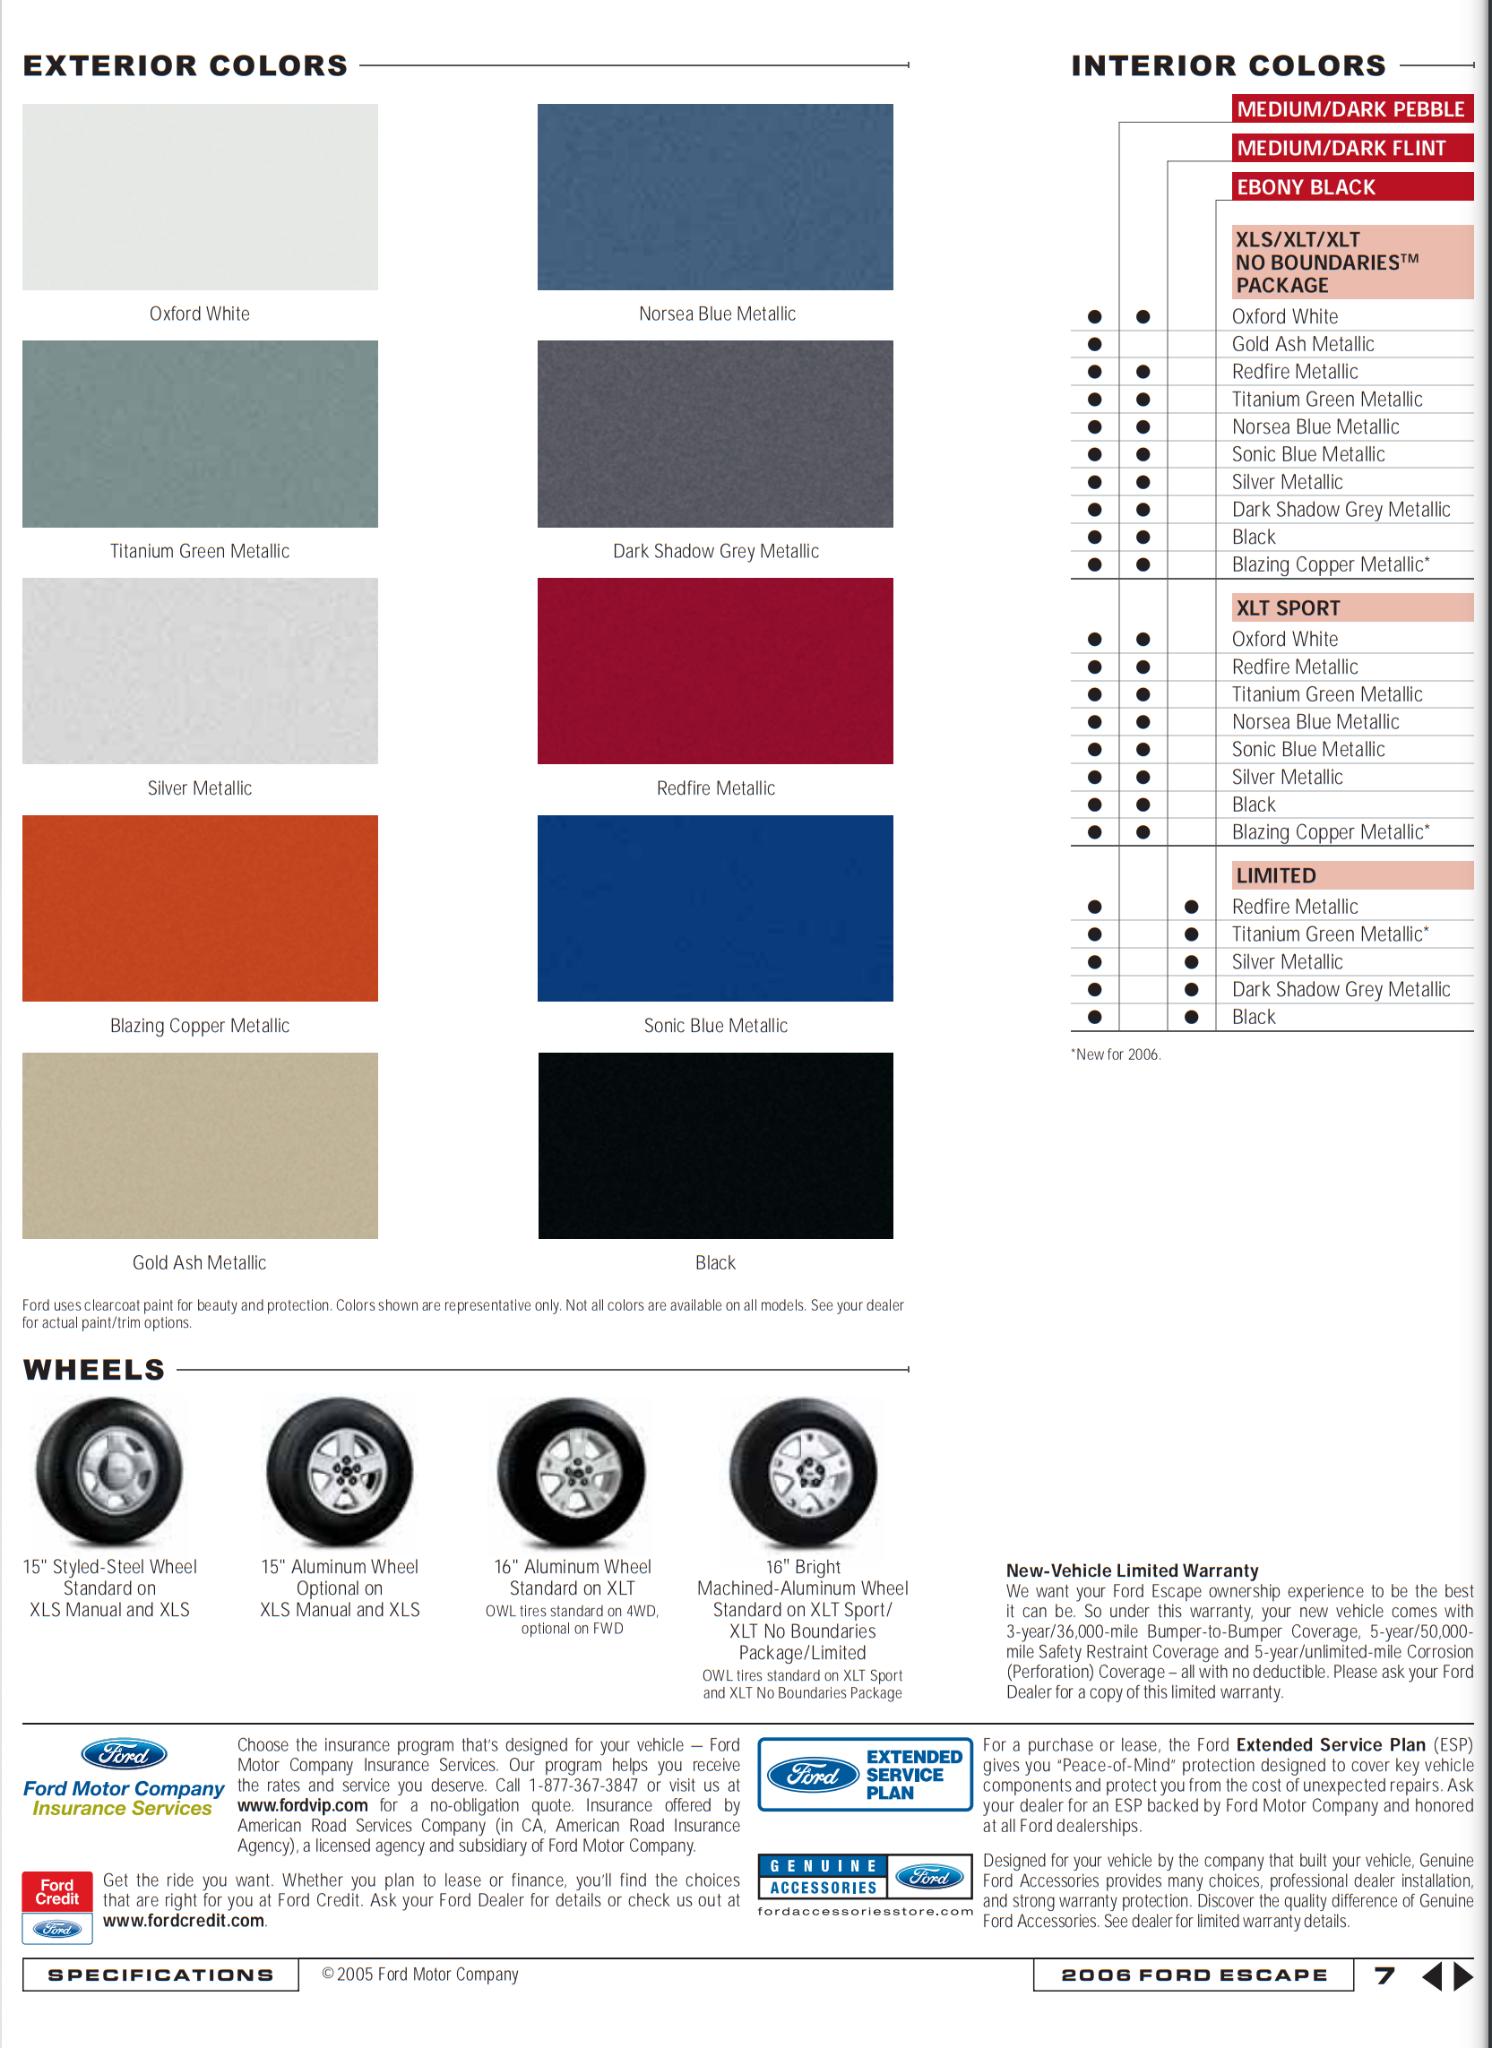 exterior paint color examples